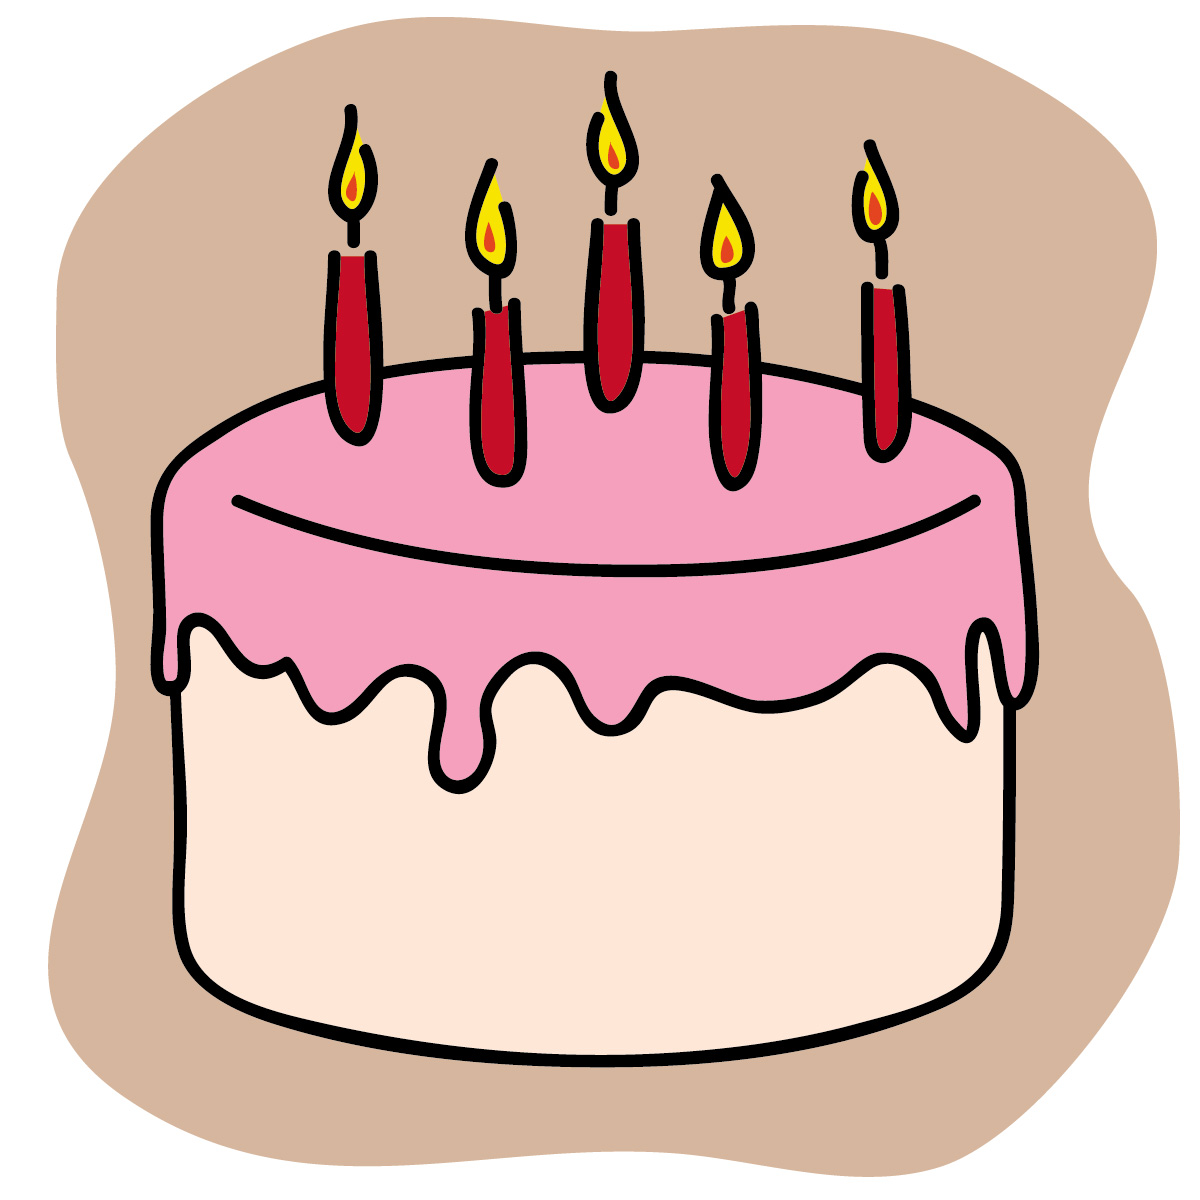 Happy birthday cake with name edit for facebook clip art - Cliparting.com